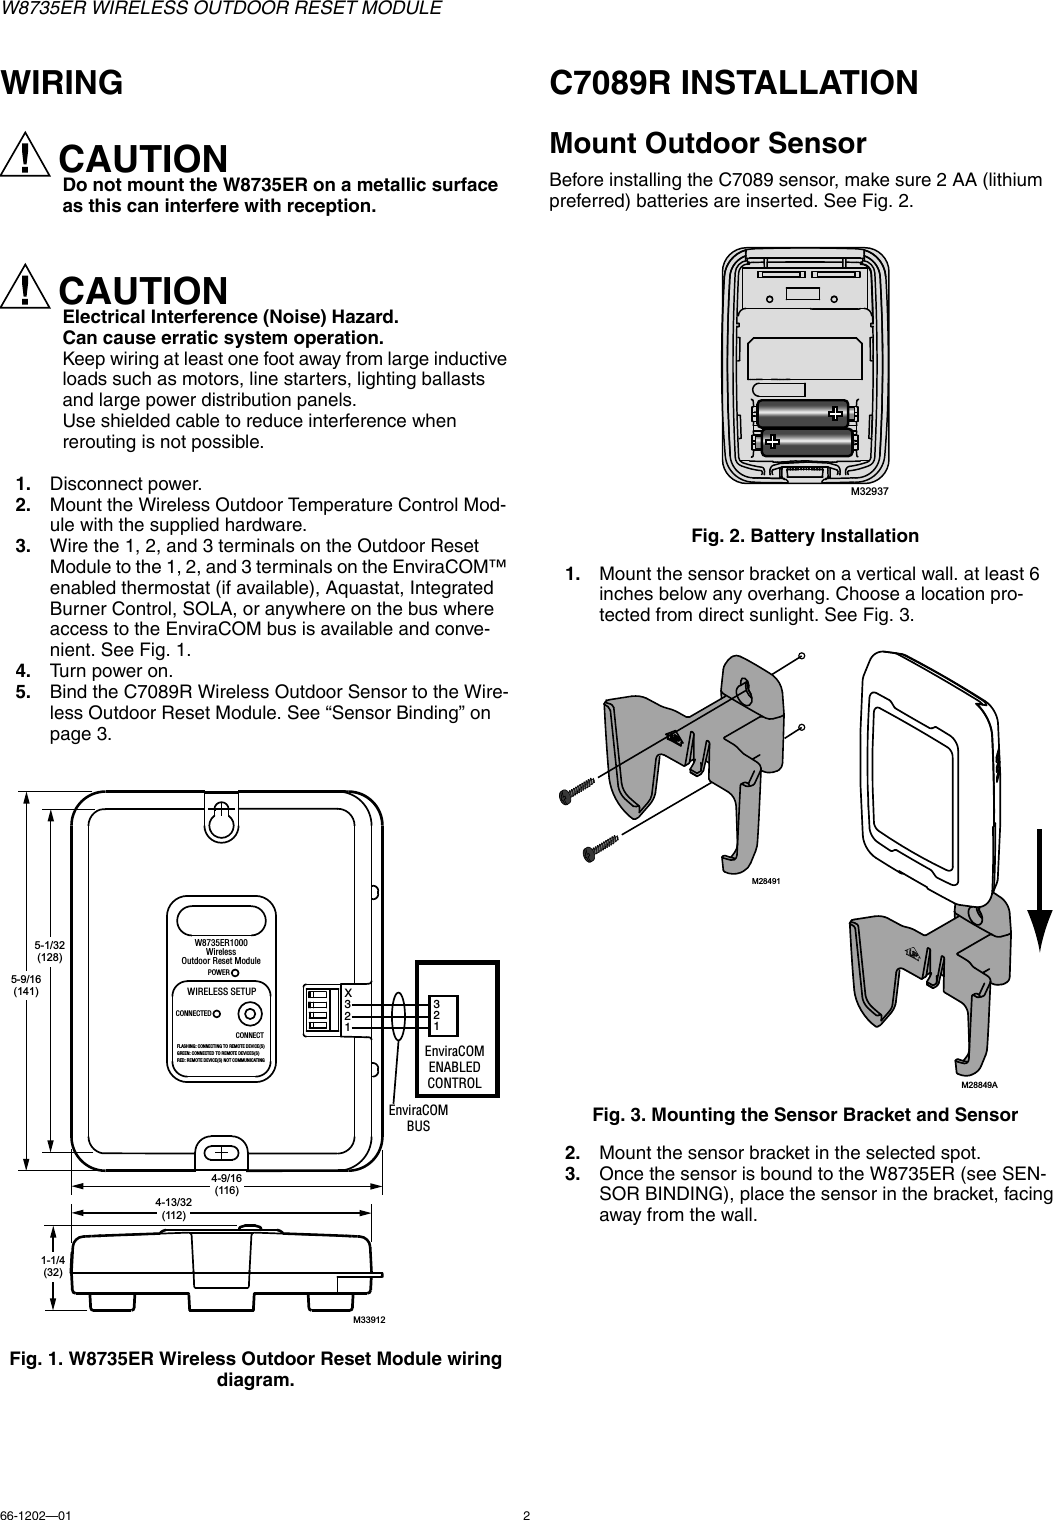 W8735ER WIRELESS OUTDOOR RESET MODULE66-1202—01 2WIRINGCAUTIONDo not mount the W8735ER on a metallic surface as this can interfere with reception.CAUTIONElectrical Interference (Noise) Hazard.Can cause erratic system operation.Keep wiring at least one foot away from large inductive loads such as motors, line starters, lighting ballasts and large power distribution panels.Use shielded cable to reduce interference when rerouting is not possible.1. Disconnect power.2. Mount the Wireless Outdoor Temperature Control Mod-ule with the supplied hardware.3. Wire the 1, 2, and 3 terminals on the Outdoor Reset Module to the 1, 2, and 3 terminals on the EnviraCOM™ enabled thermostat (if available), Aquastat, Integrated Burner Control, SOLA, or anywhere on the bus where access to the EnviraCOM bus is available and conve-nient. See Fig. 1.4. Turn power on.5. Bind the C7089R Wireless Outdoor Sensor to the Wire-less Outdoor Reset Module. See “Sensor Binding” on page 3.Fig. 1. W8735ER Wireless Outdoor Reset Module wiring diagram.C7089R INSTALLATIONMount Outdoor SensorBefore installing the C7089 sensor, make sure 2 AA (lithium preferred) batteries are inserted. See Fig. 2.Fig. 2. Battery Installation1. Mount the sensor bracket on a vertical wall. at least 6 inches below any overhang. Choose a location pro-tected from direct sunlight. See Fig. 3.Fig. 3. Mounting the Sensor Bracket and Sensor2. Mount the sensor bracket in the selected spot.3. Once the sensor is bound to the W8735ER (see SEN-SOR BINDING), place the sensor in the bracket, facing away from the wall.M339125-9/16(141)5-1/32(128)1-1/4(32)4-9/16(116)4-13/32(112)X321W8735ER1000WirelessOutdoor Reset ModulePOWERWIRELESS SETUPCONNECTEDCONNECTFLASHING: CONNECTING TO REMOTE DEVICE(S)GREEN: CONNECTED TO REMOTE DEVICES(S)RED: REMOTE DEVICE(S) NOT COMMUNICATINGEnviraCOMBUS321EnviraCOMENABLEDCONTROLM32937M28491M28849A